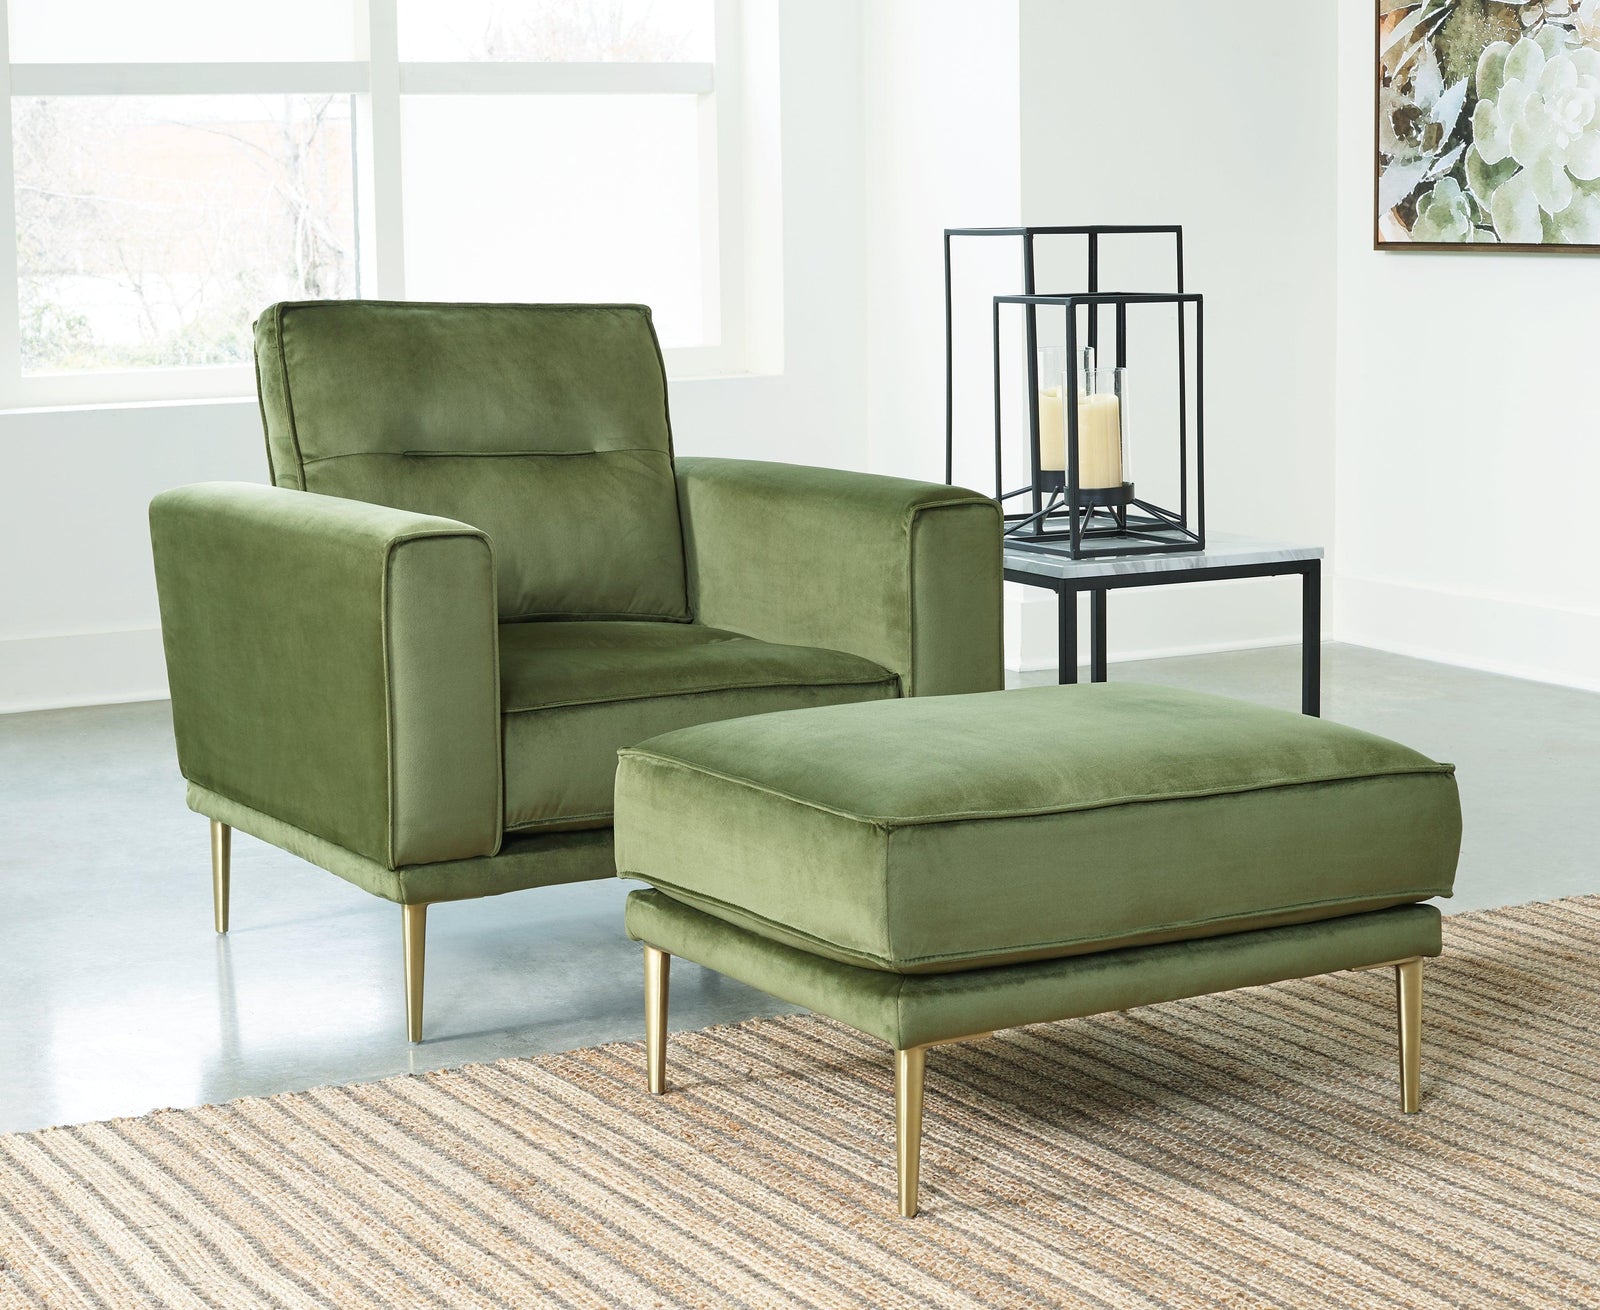 Macleary Moss Chair And Ottoman - Ella Furniture